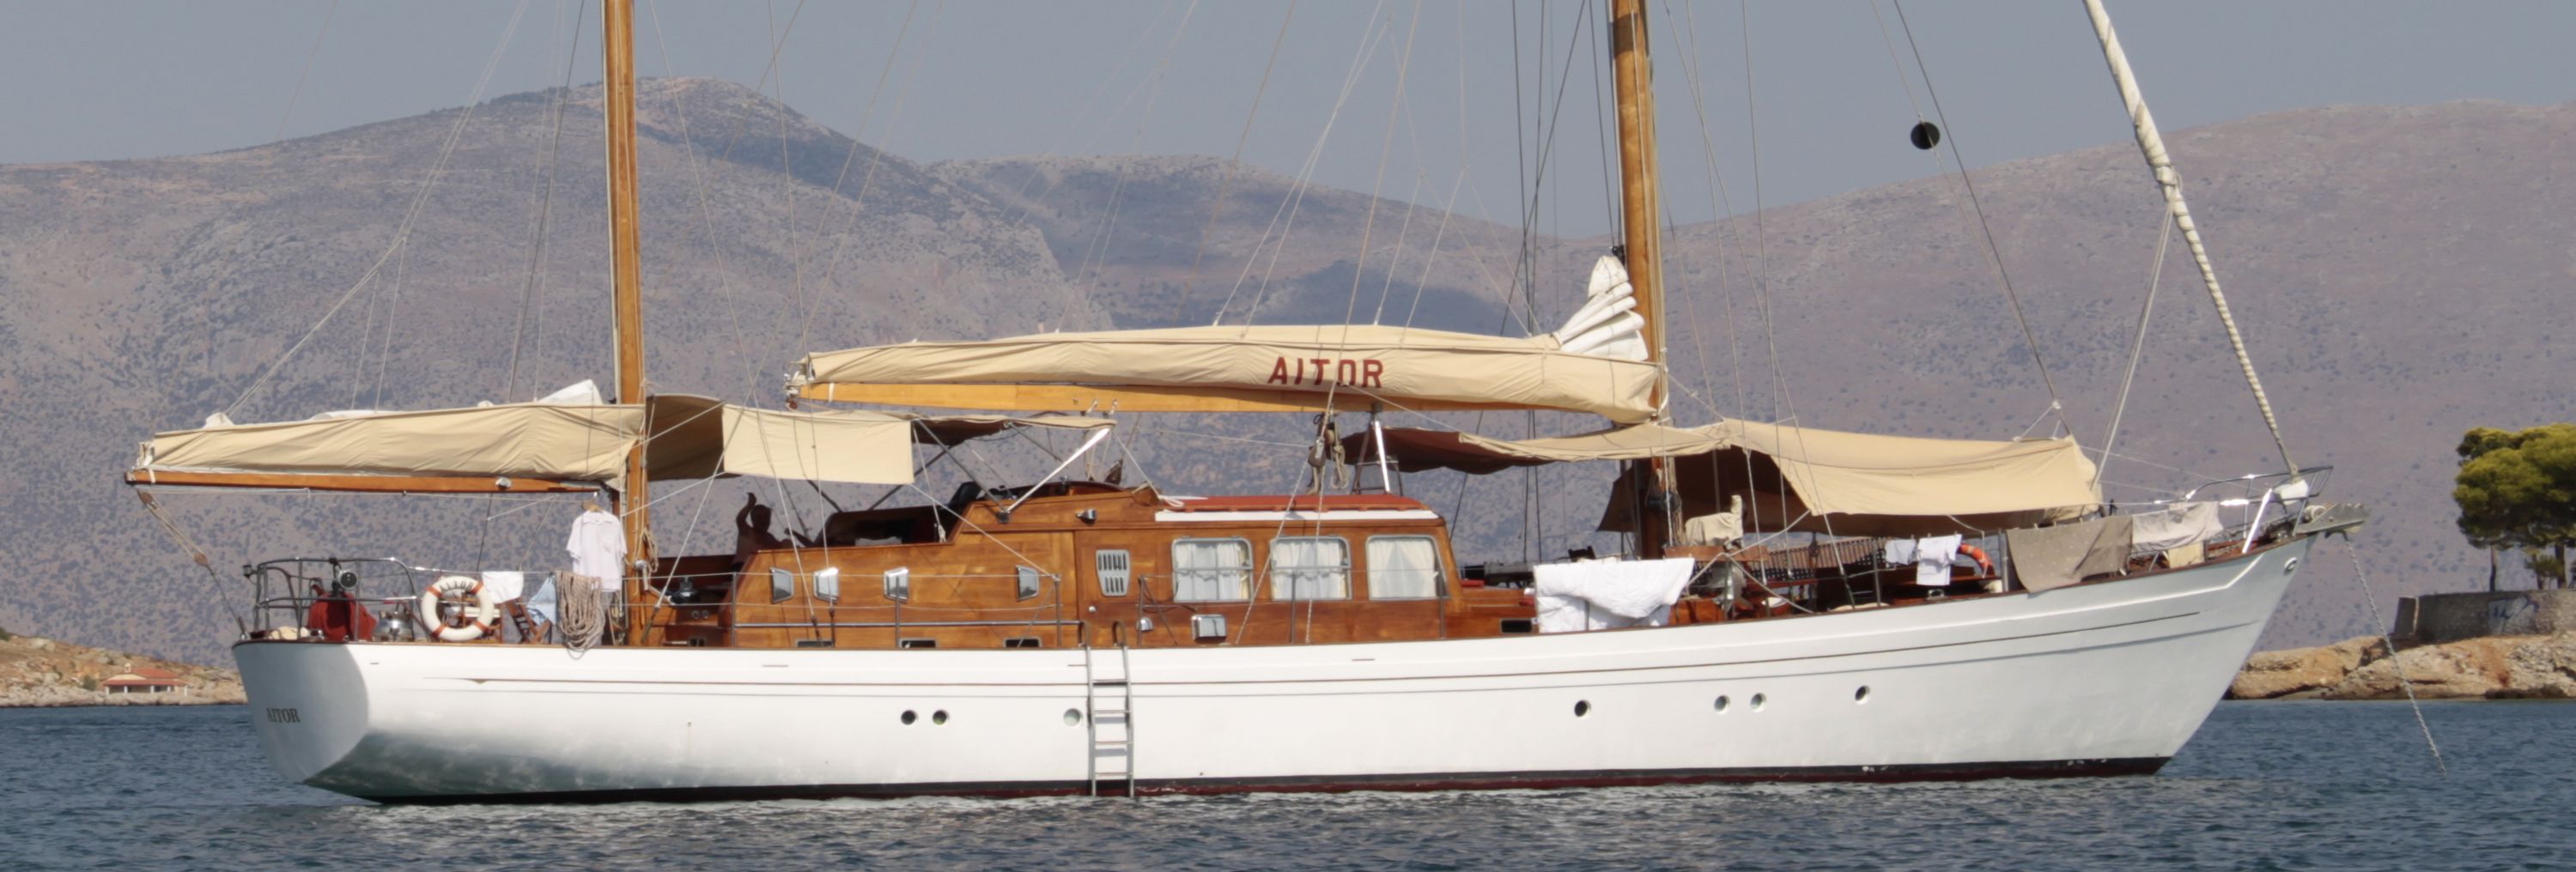 AITOR  71ft Classic Ketch: New sailing yacht for sale | BGYB